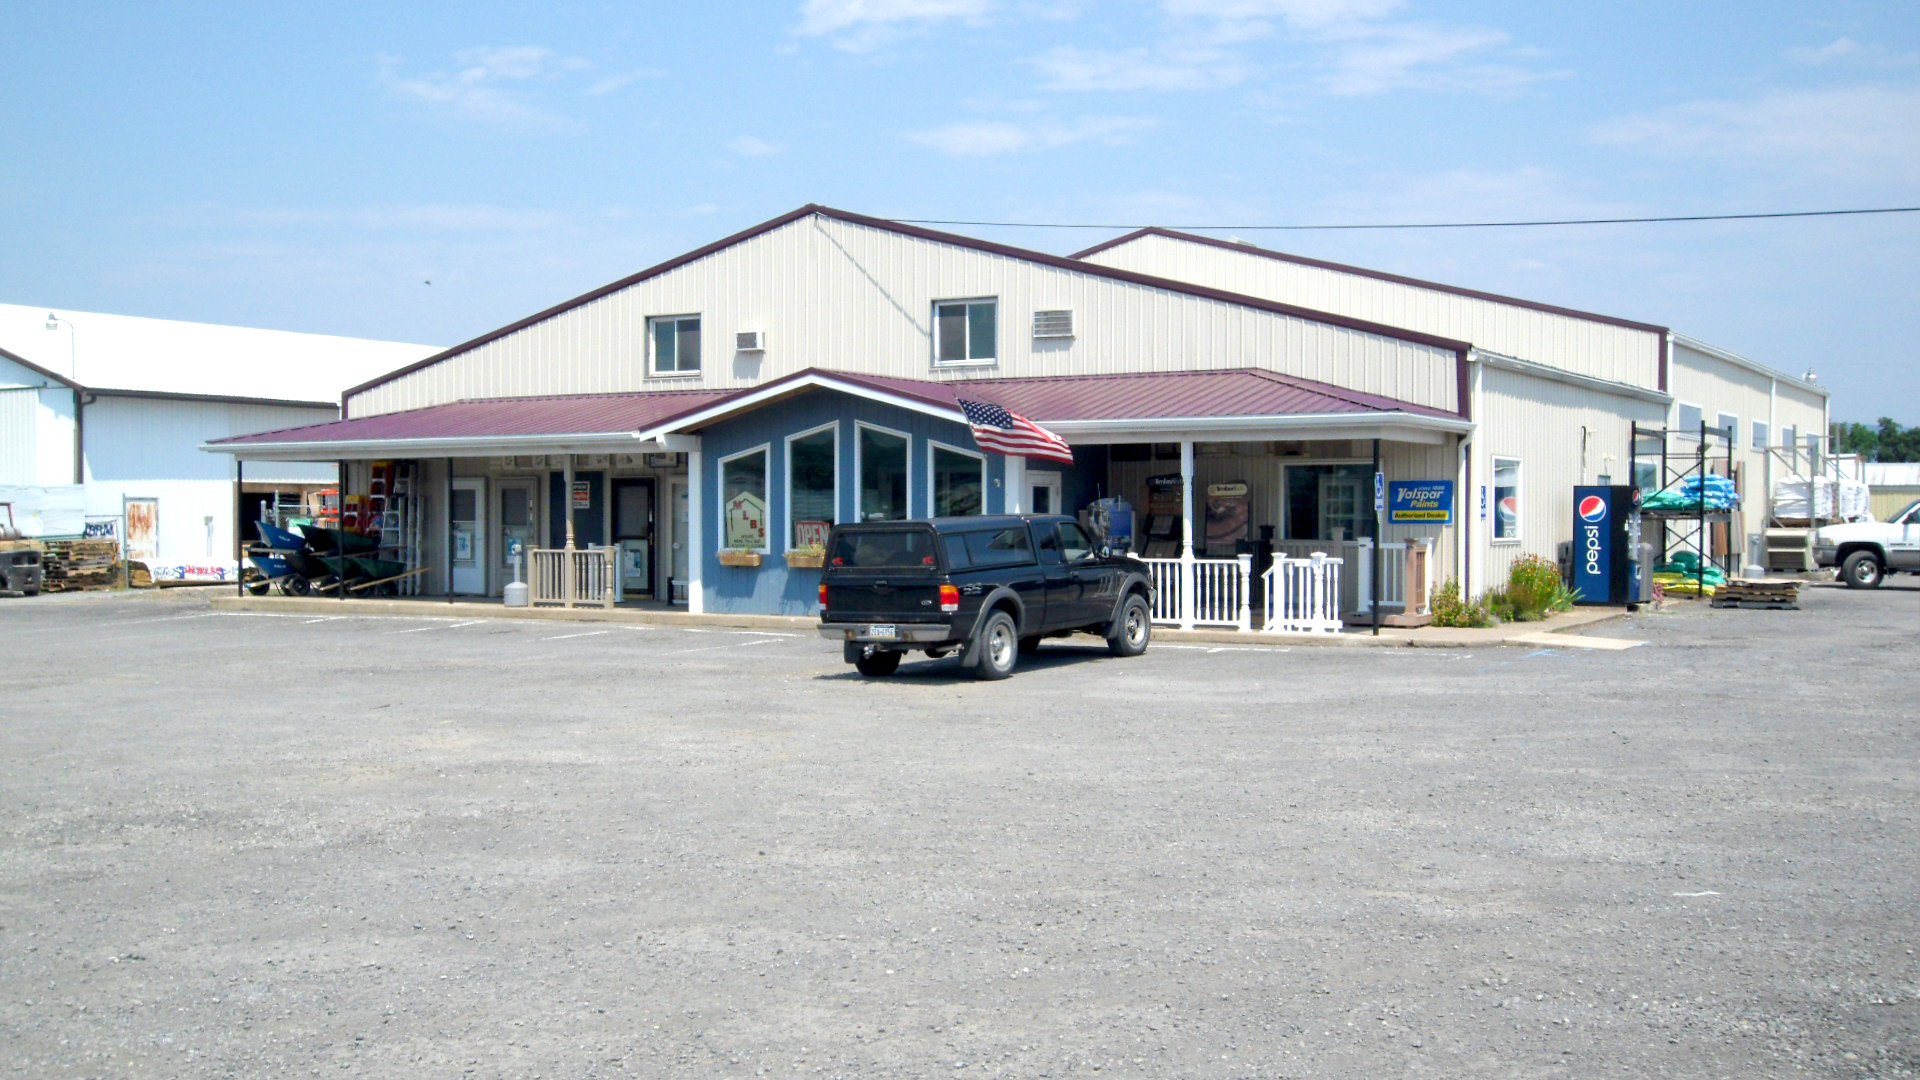 The exterior of Mifflinburg Lumber and Building Supply, just next to route 45 in Mifflinburg, PA